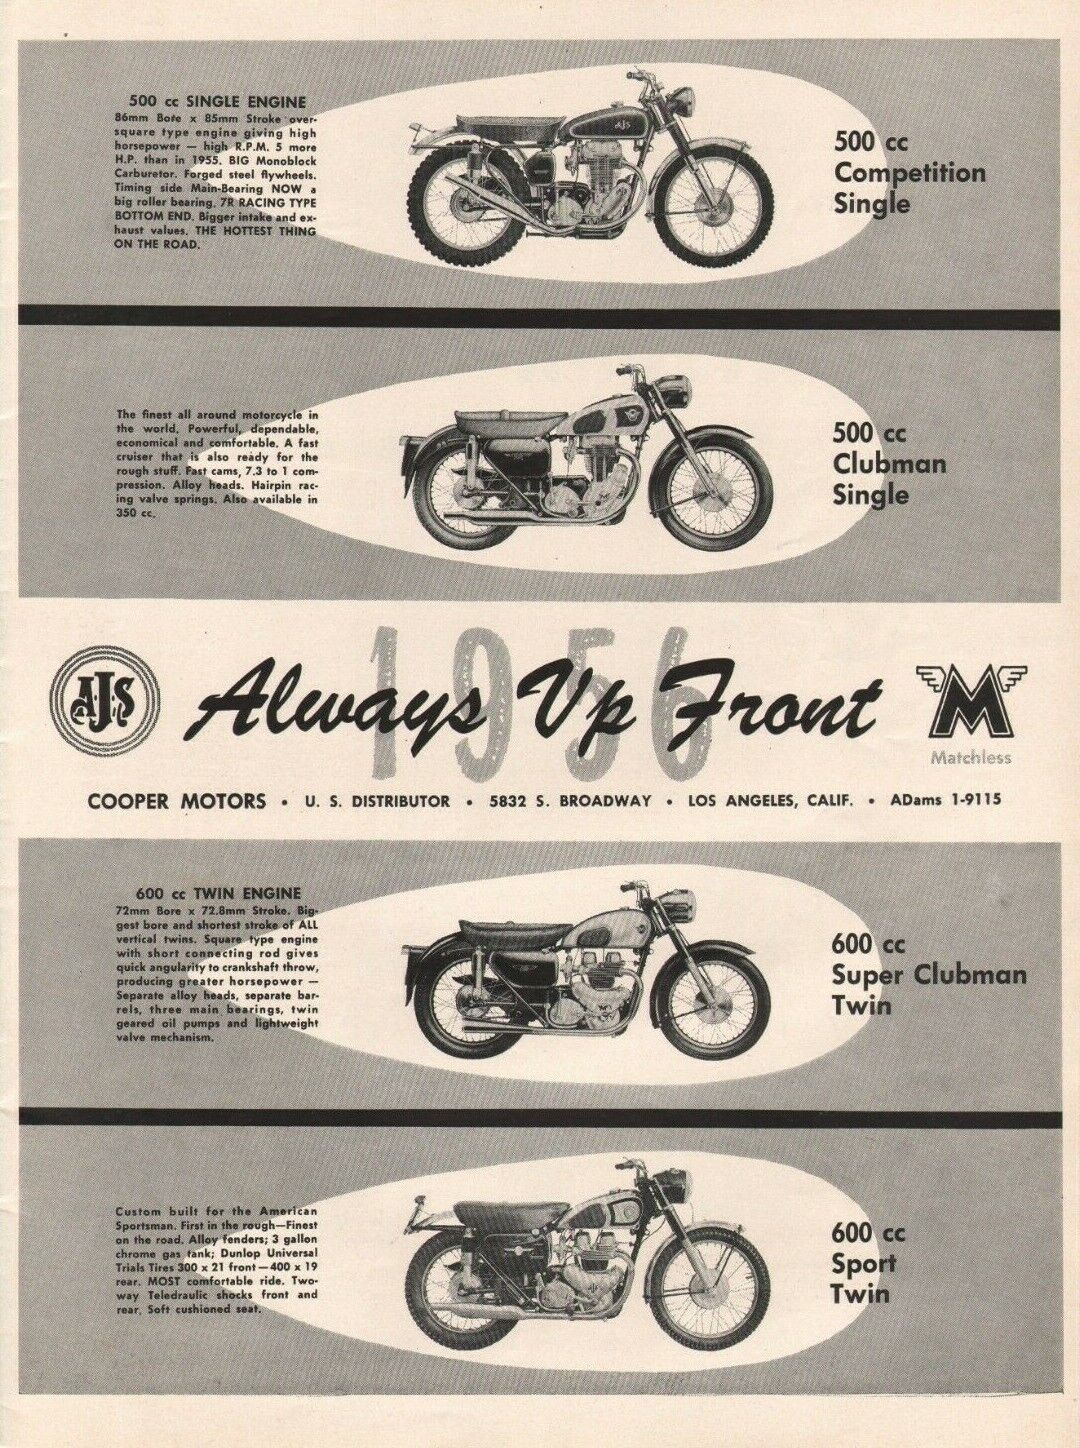 1956 AJS / Matchless Motorcycles - Vintage Motorcycle Ad